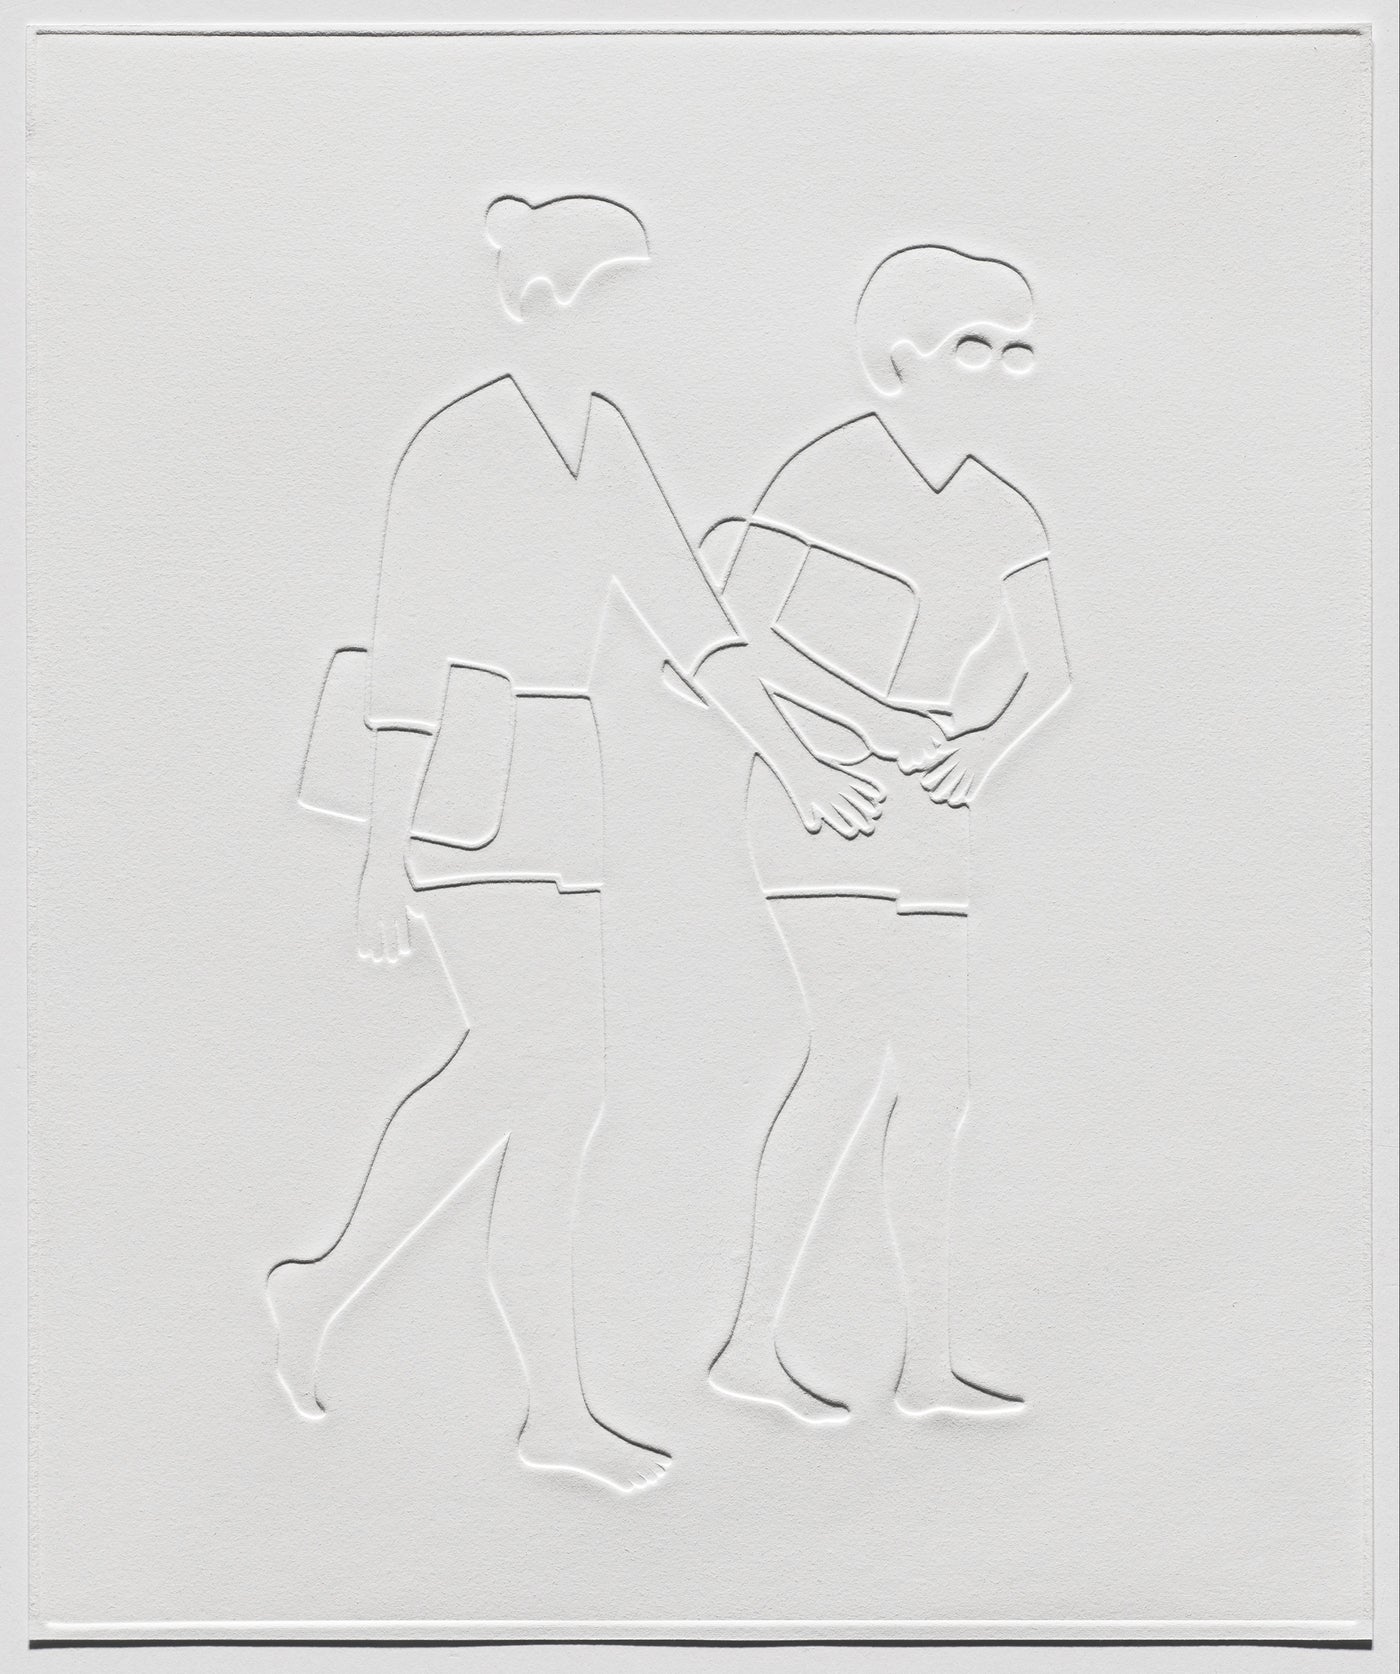 "Two Walk Right With Bags", 17 x 14 1/8”, debossed relief print on BFK Rives white 280gsm, 2022